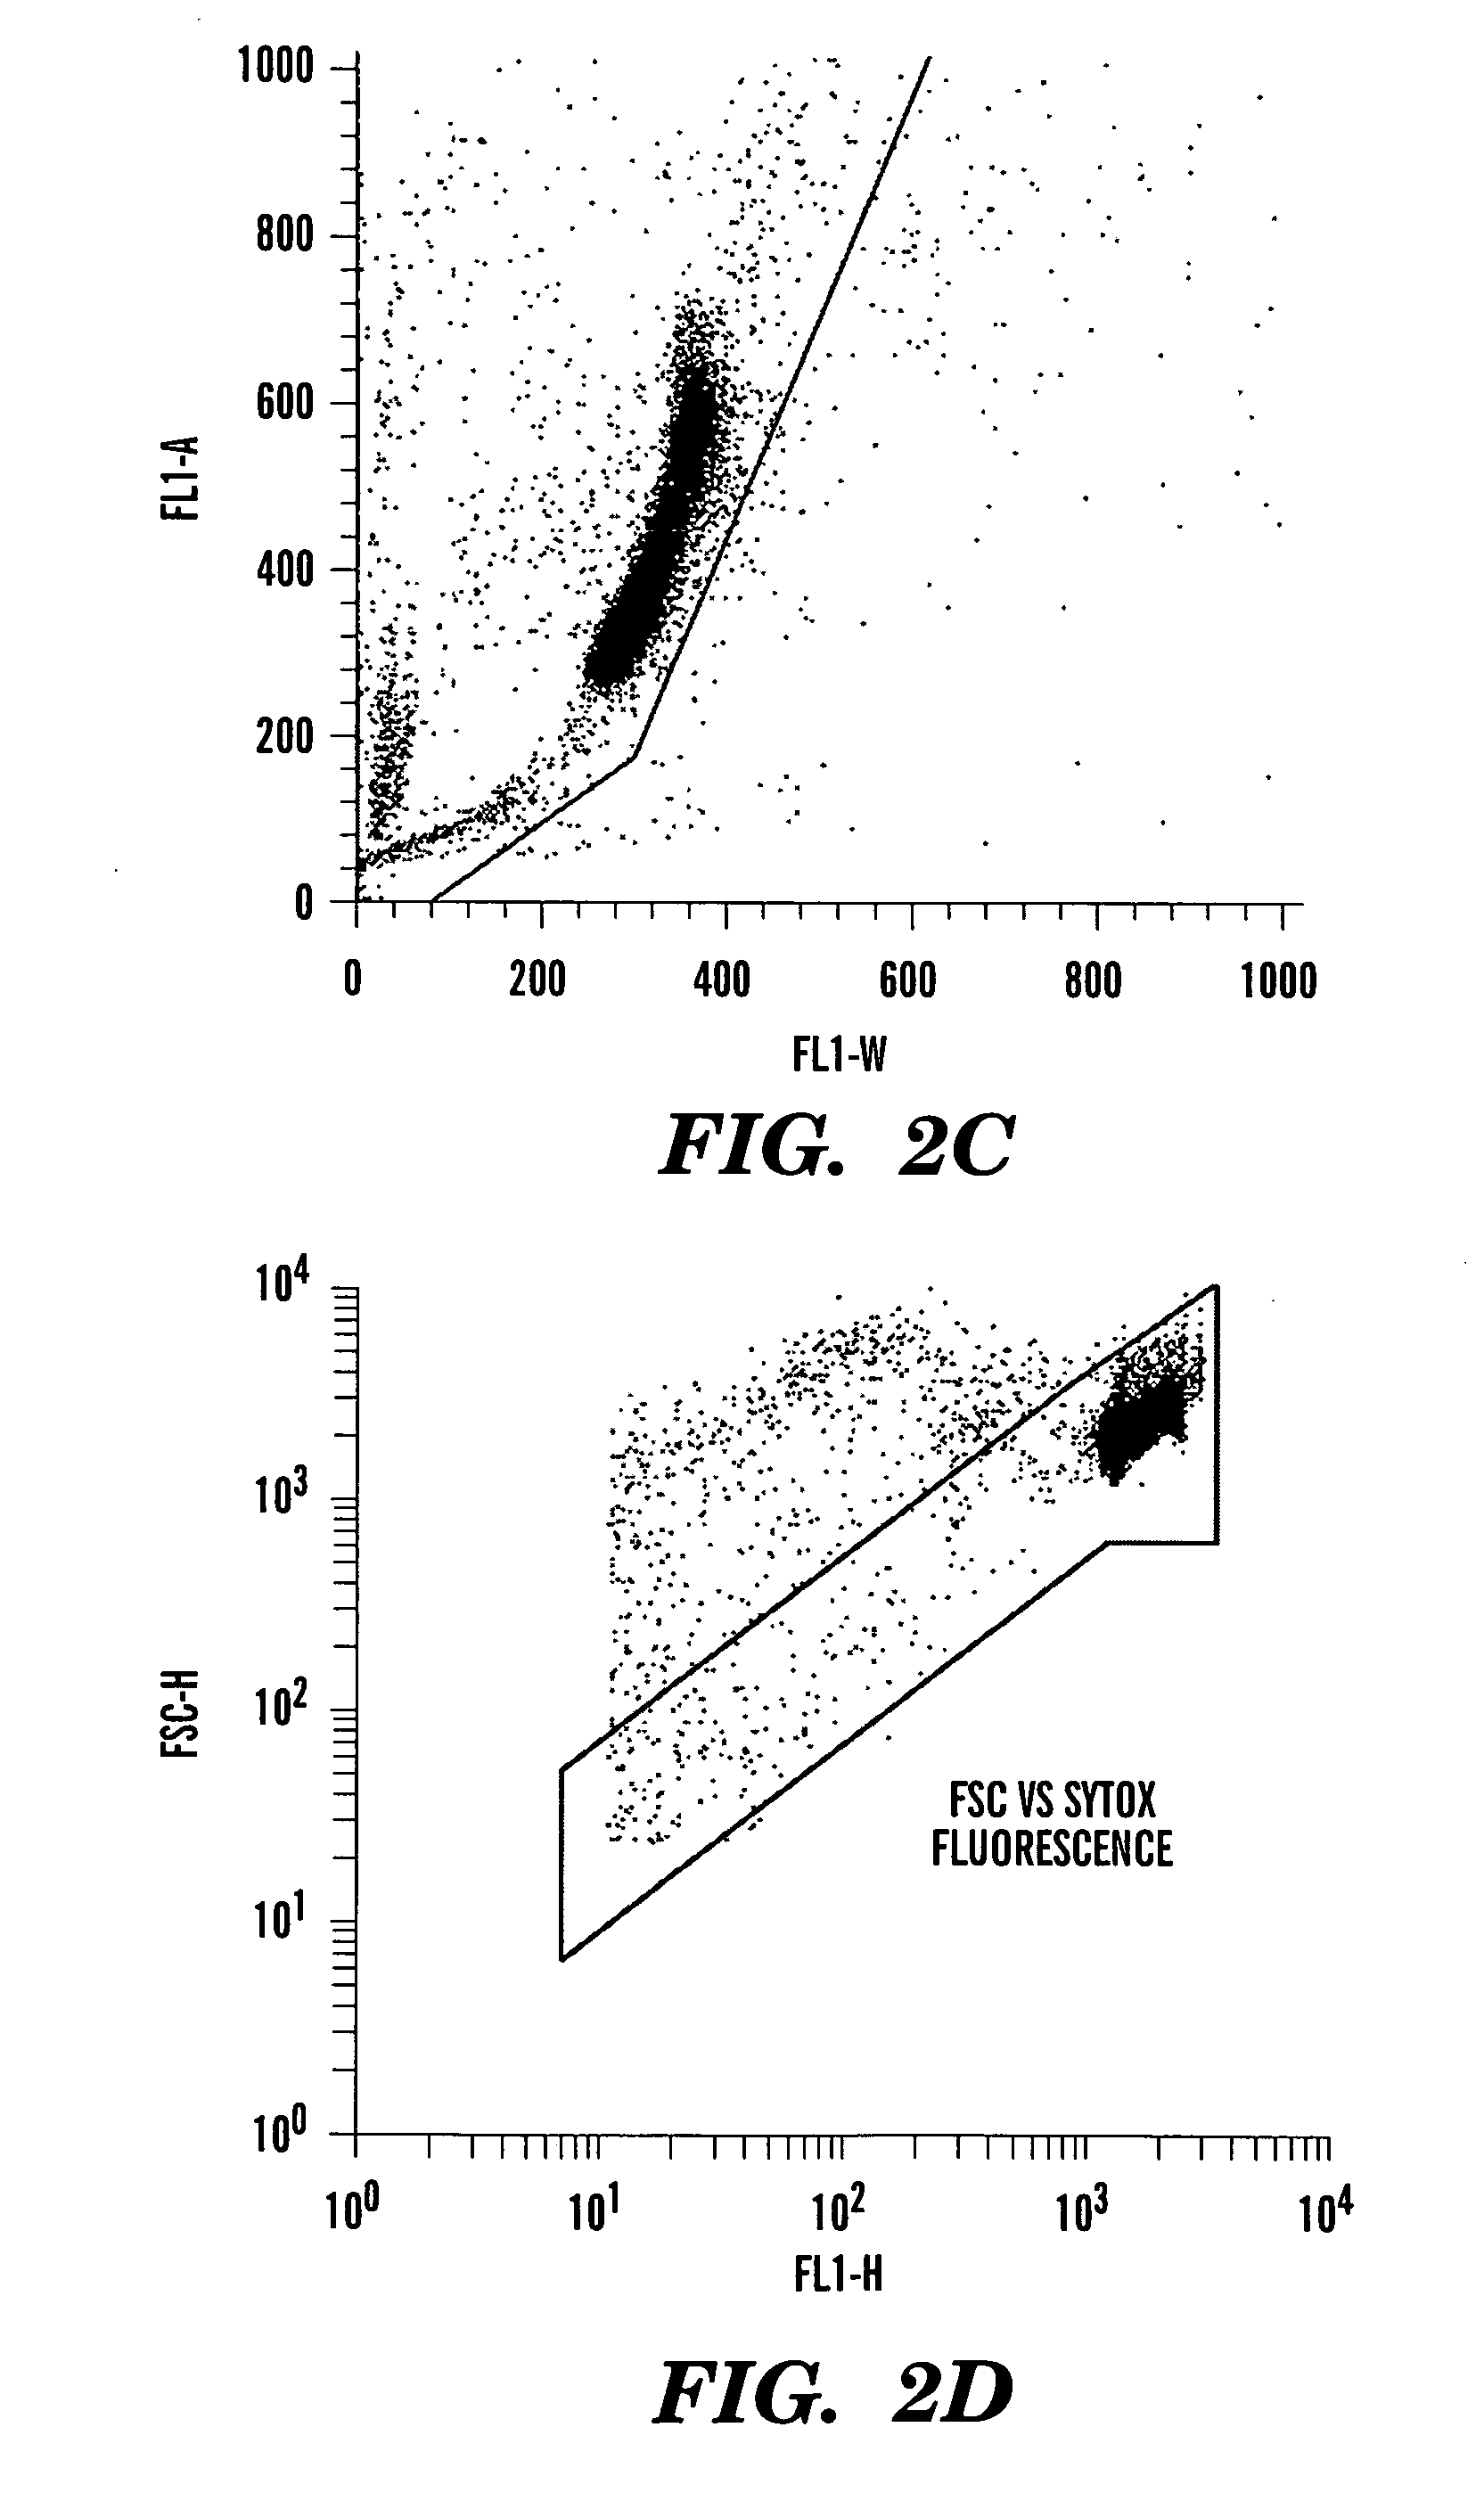 Method for enumerating mammalian cell micronuclei with an emphasis on differentially staining micronuclei and the chromatin of dead and dying cells